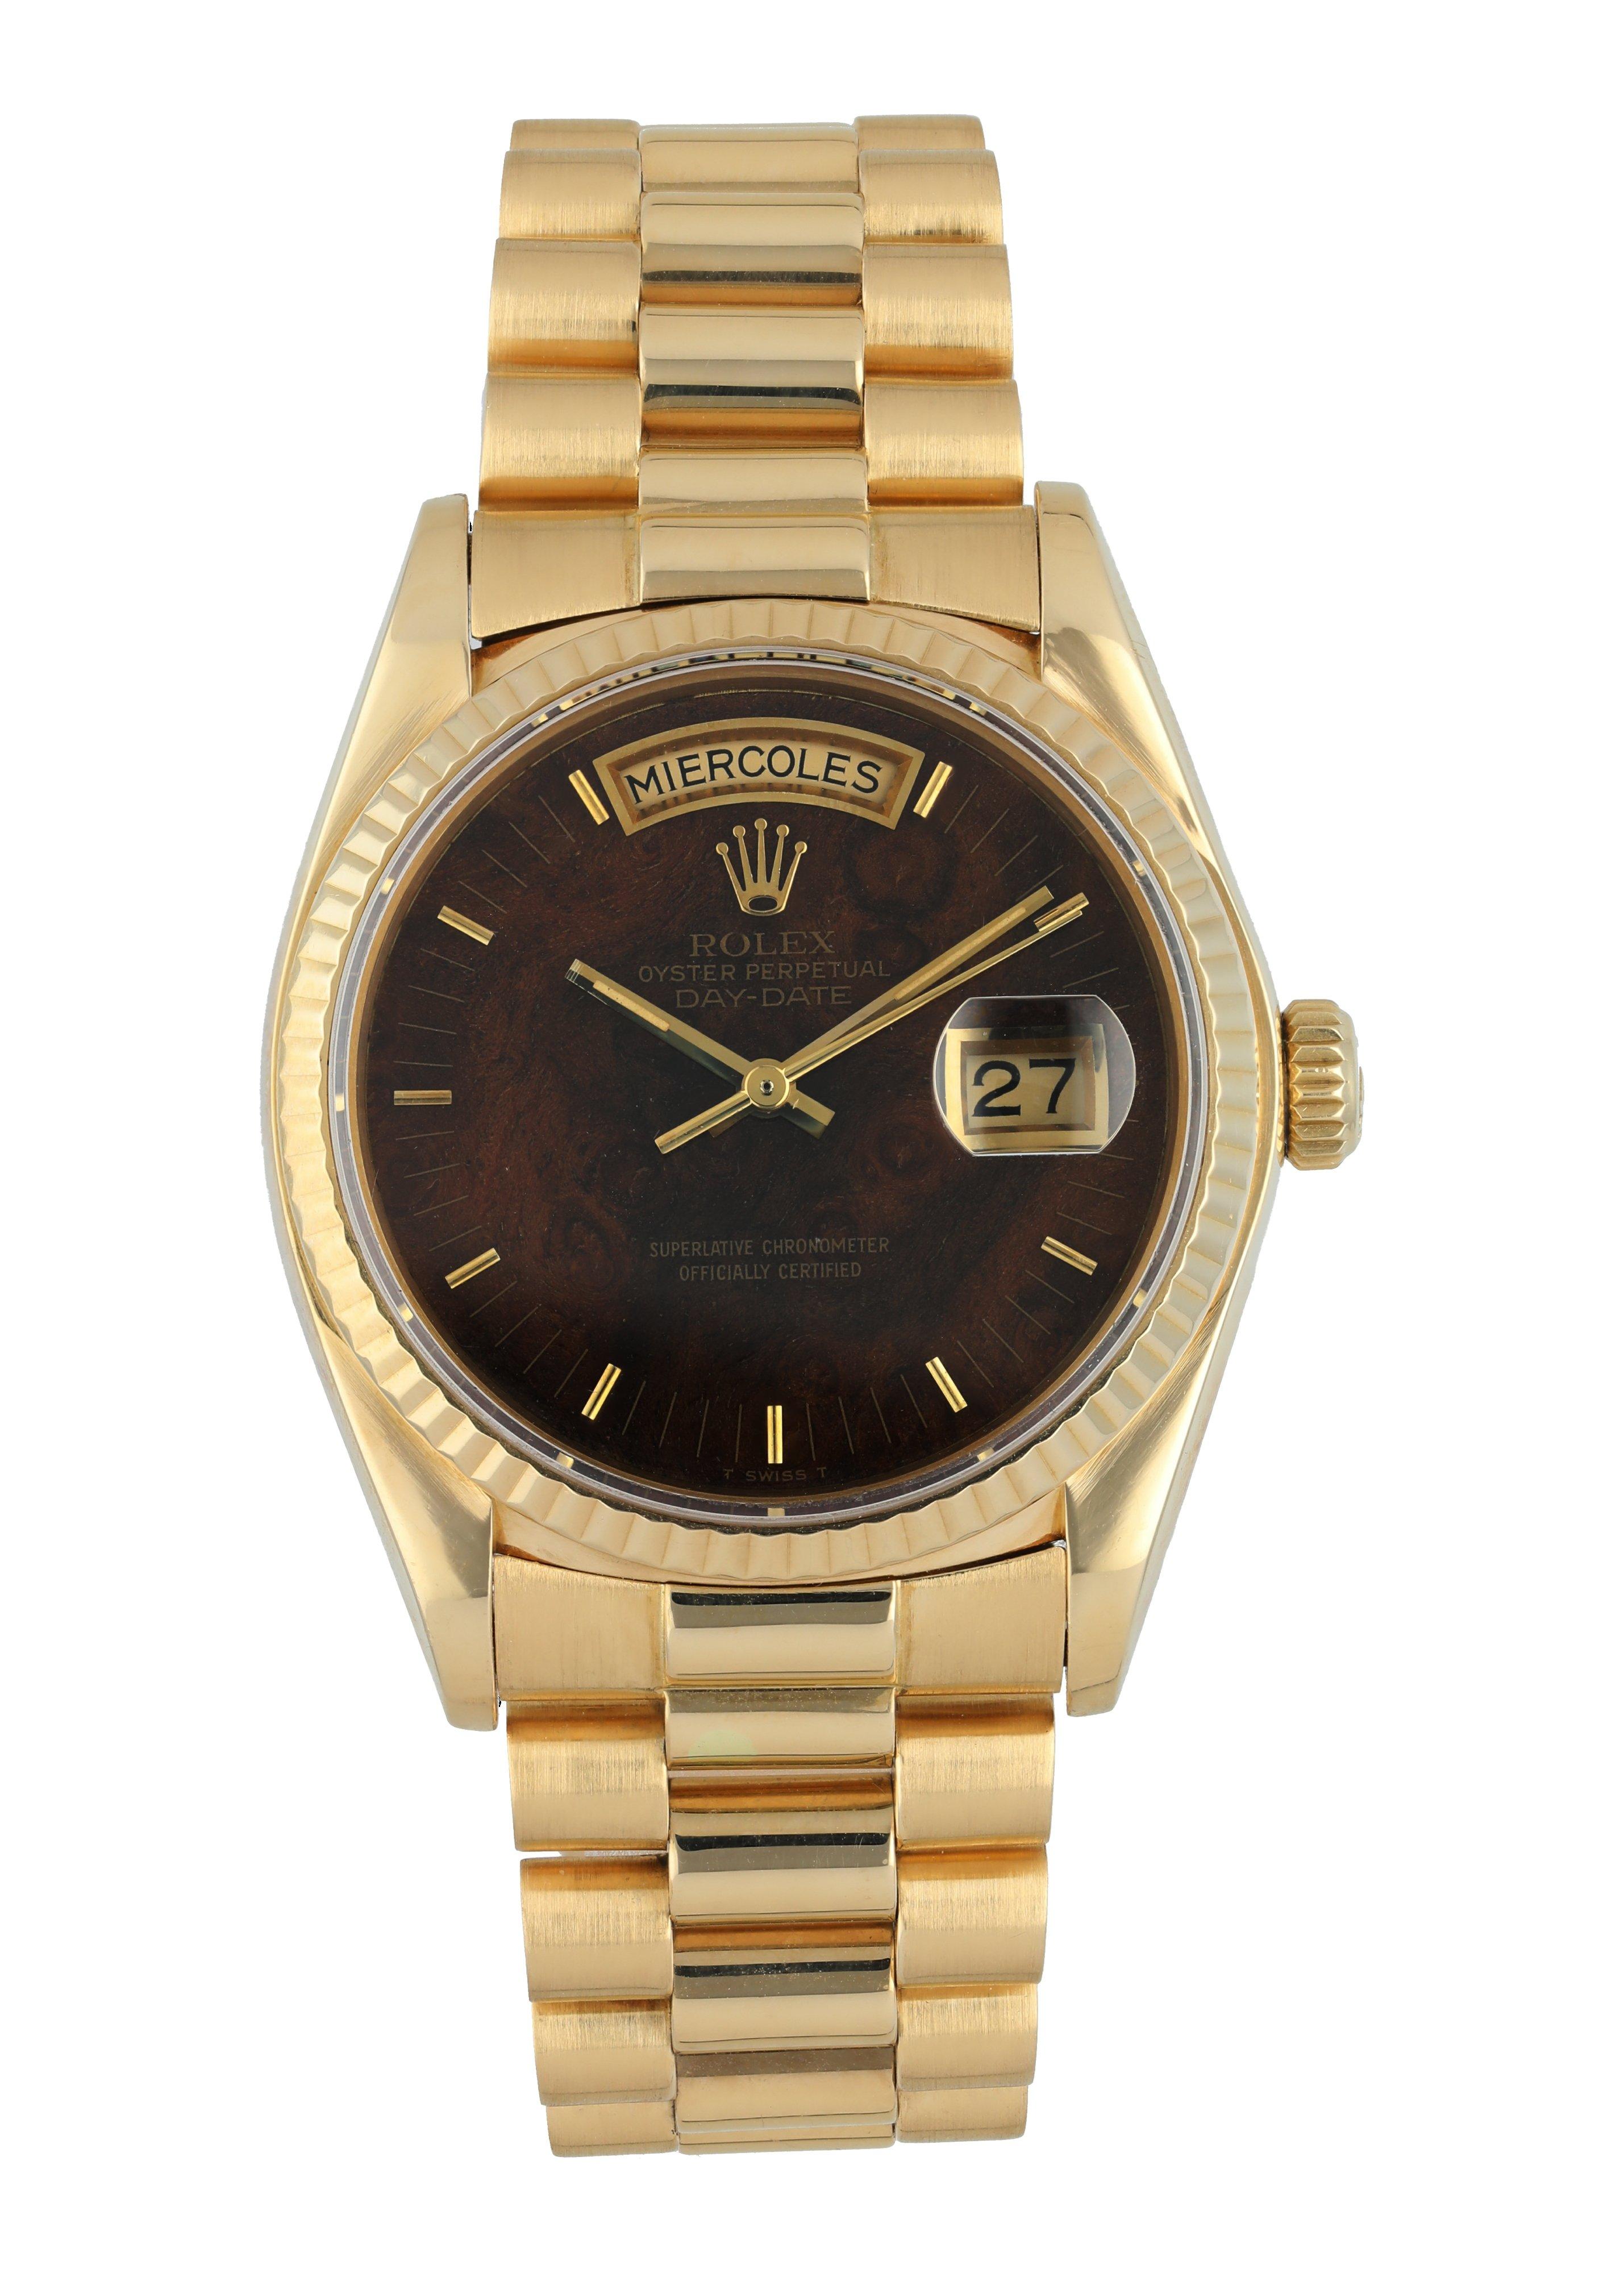 Rolex Day-Date 18038 President Men's Watch. 
36mm 18k Yellow gold case. 
18k Yellow Gold fluted Stationary bezel. 
Wood dial with gold hands and index hour markers. 
Minute markers on the outer dial. 
Date display at the 3 o'clock position. 
Yellow